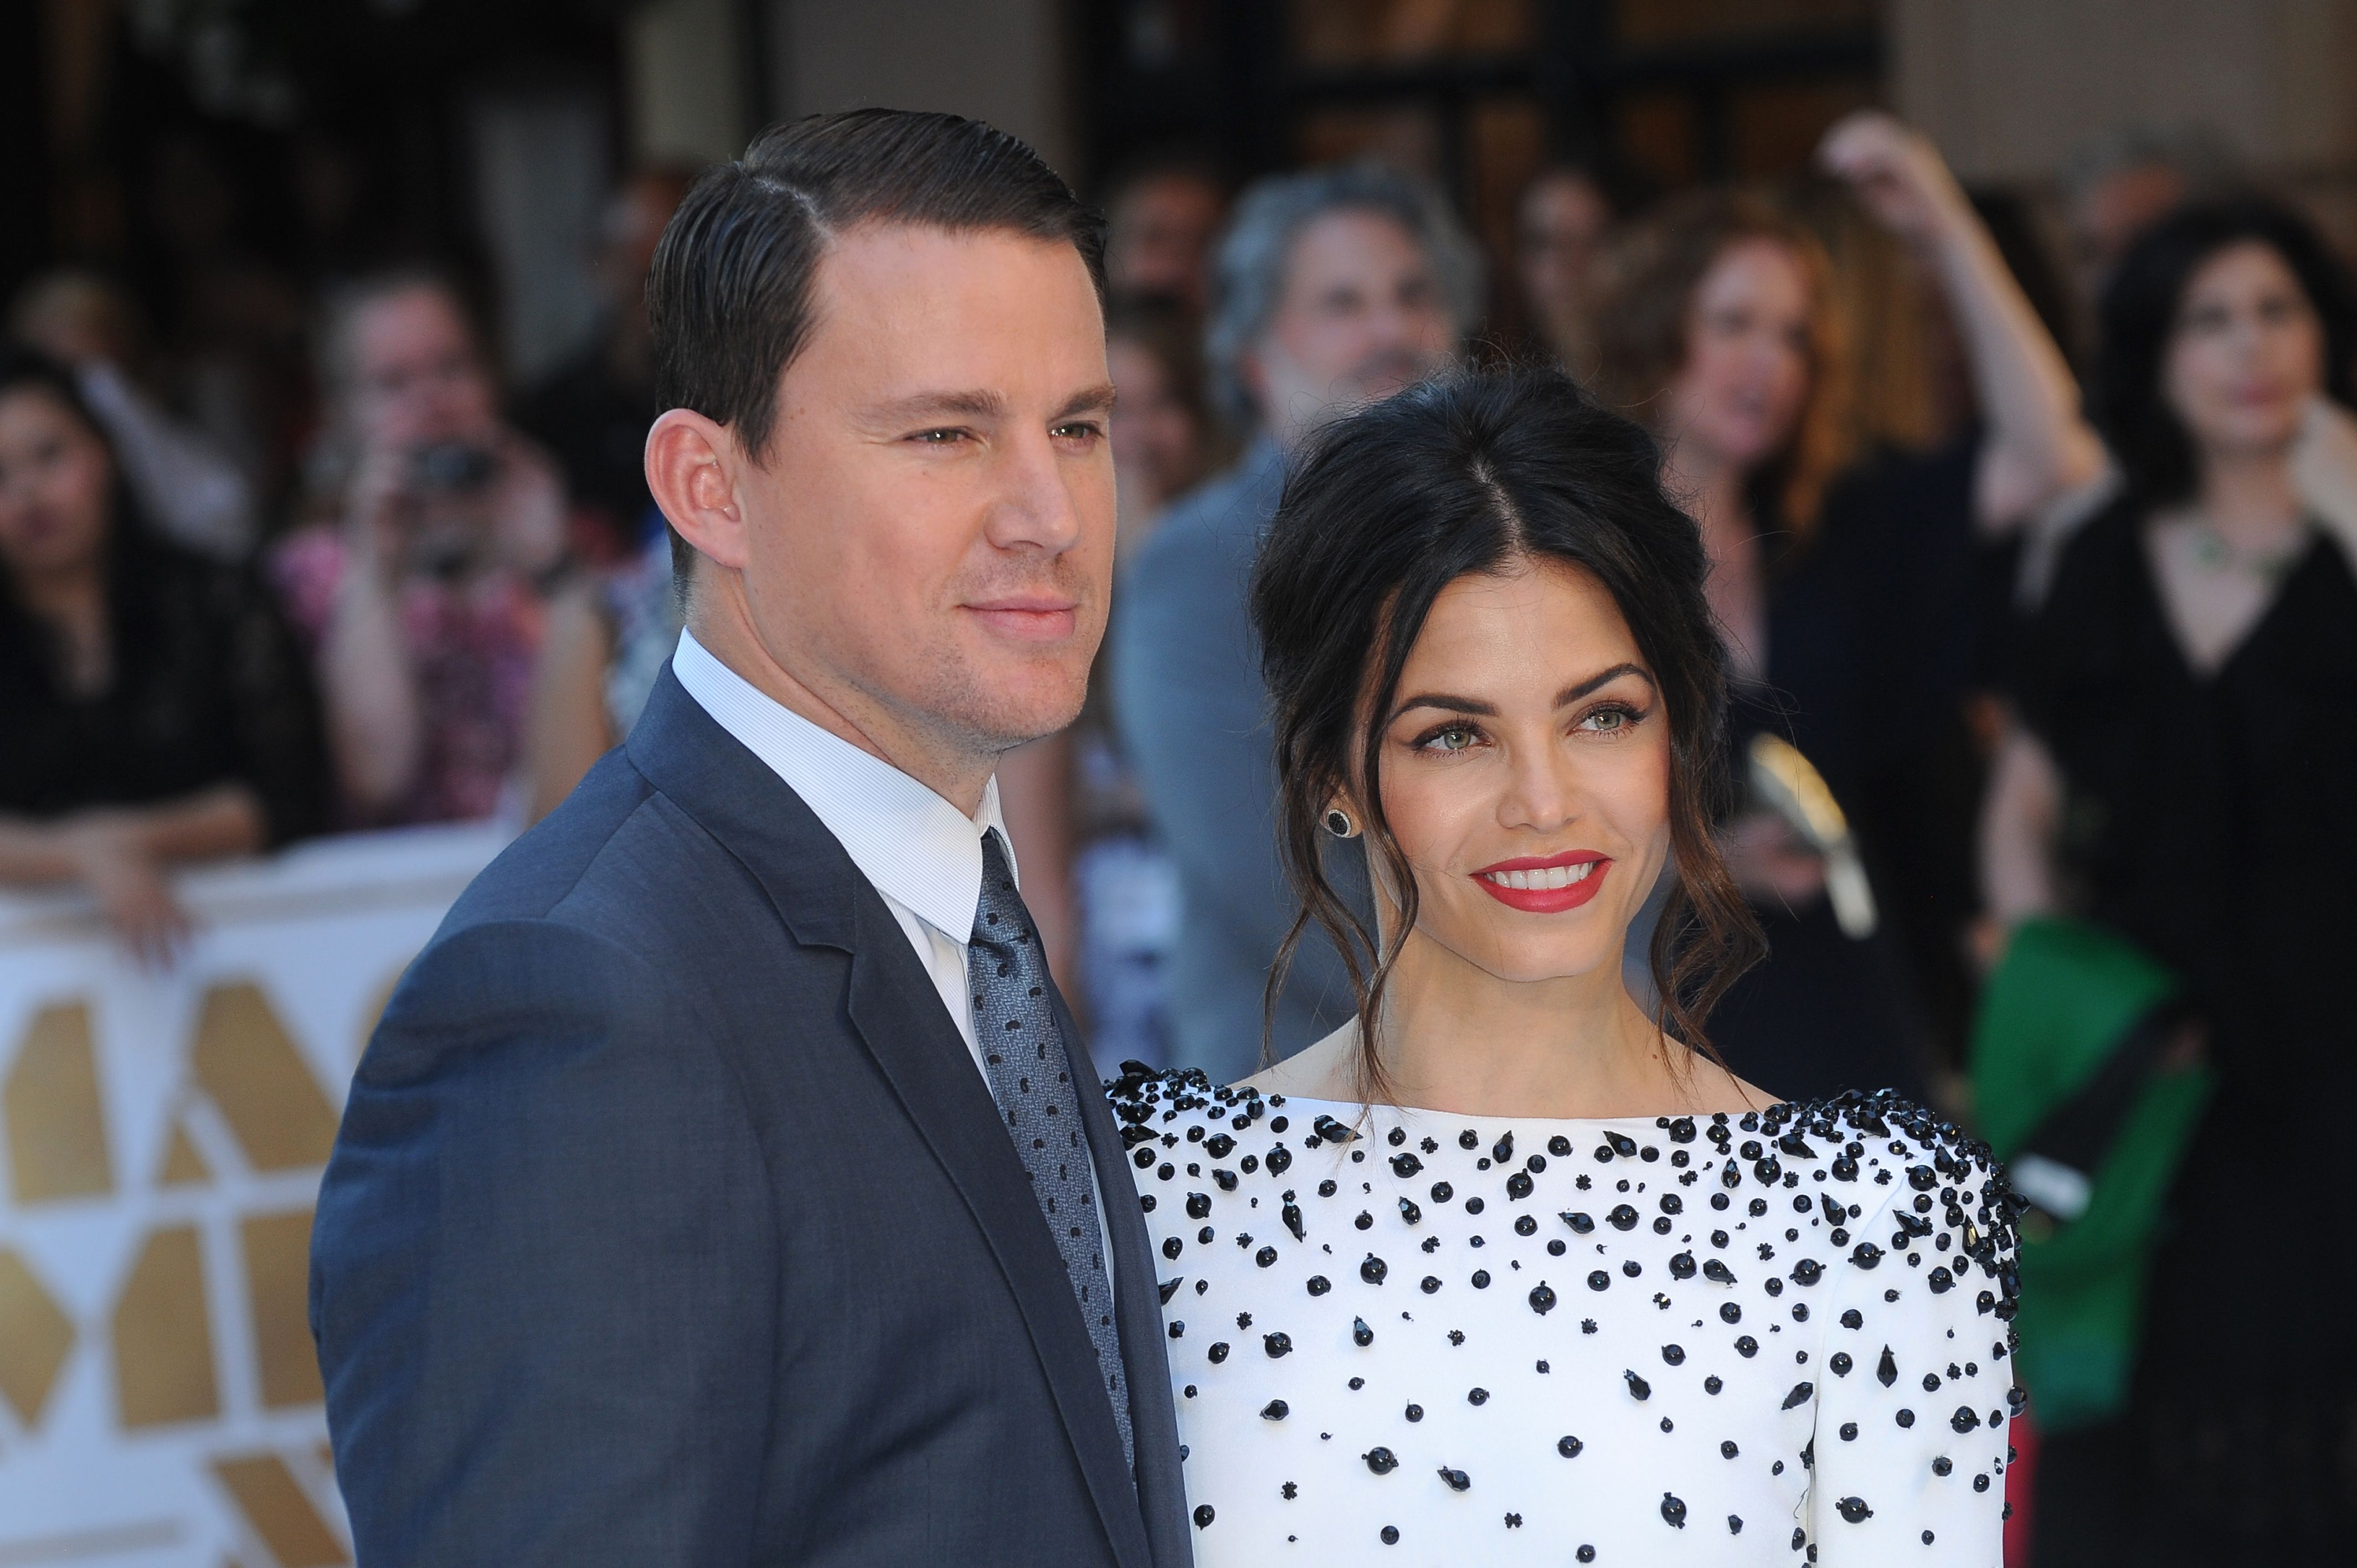 Why Channing Tatum and Jenna Dewan's Marriage Failed According to Sources -  Reports of Reasons for Tatum Separation